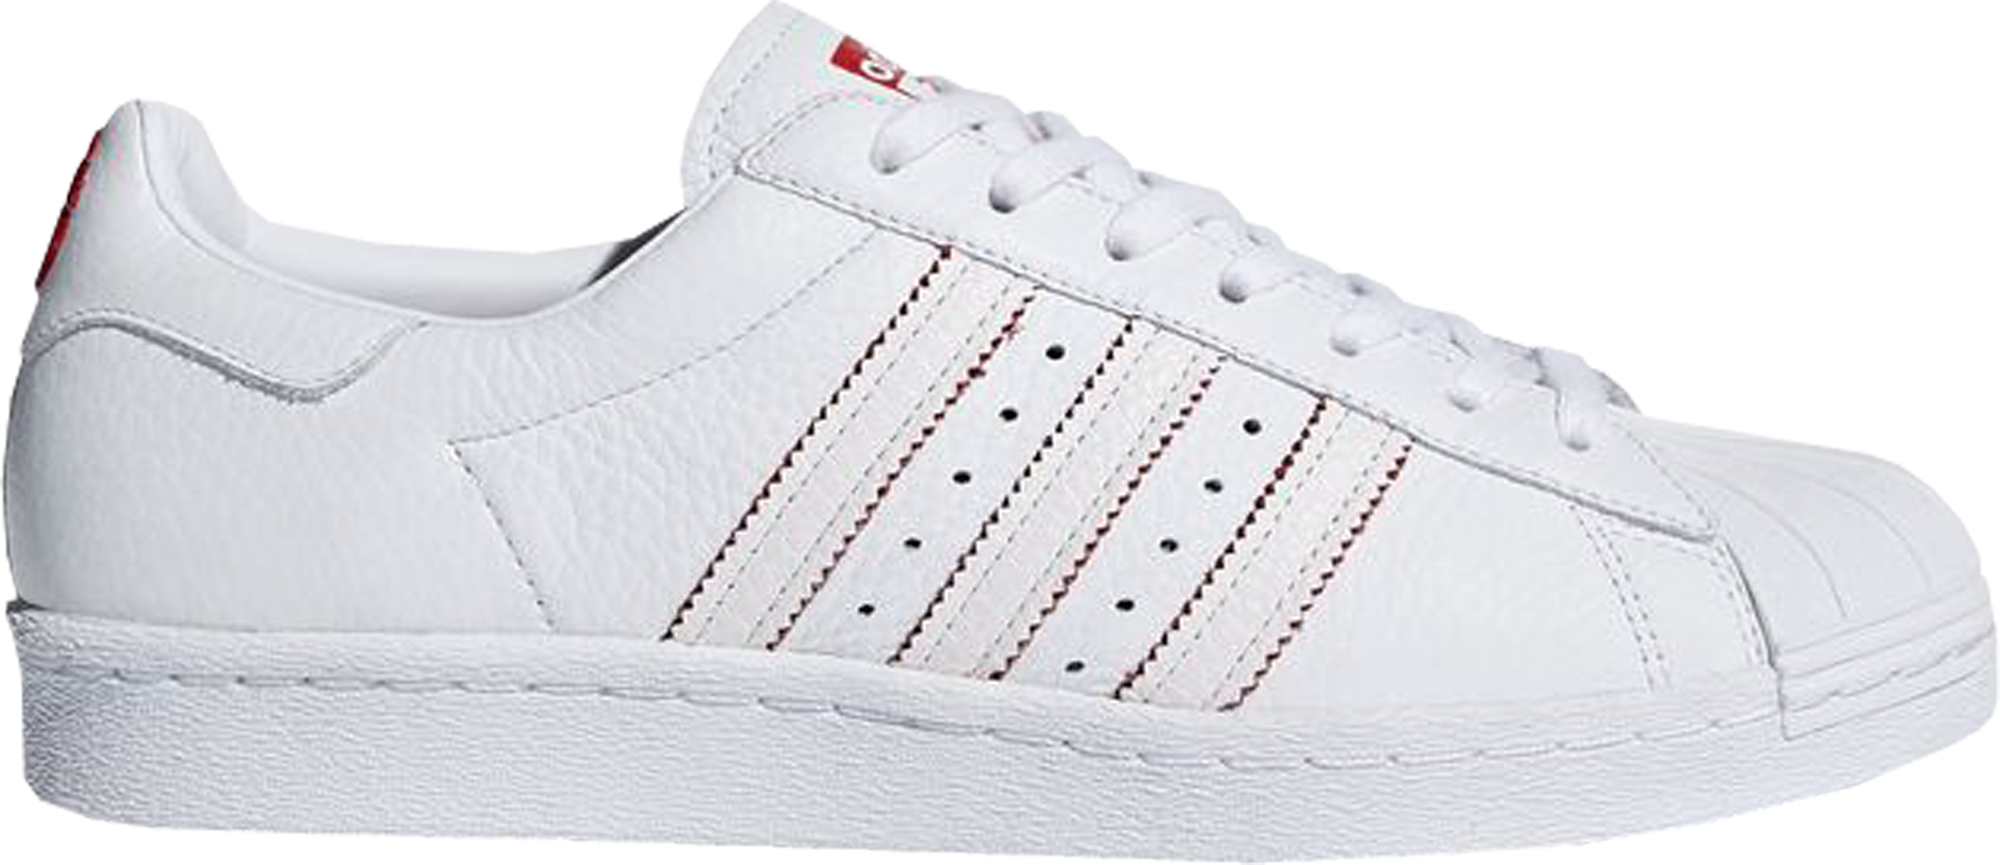 superstar 80s chinese new year shoes